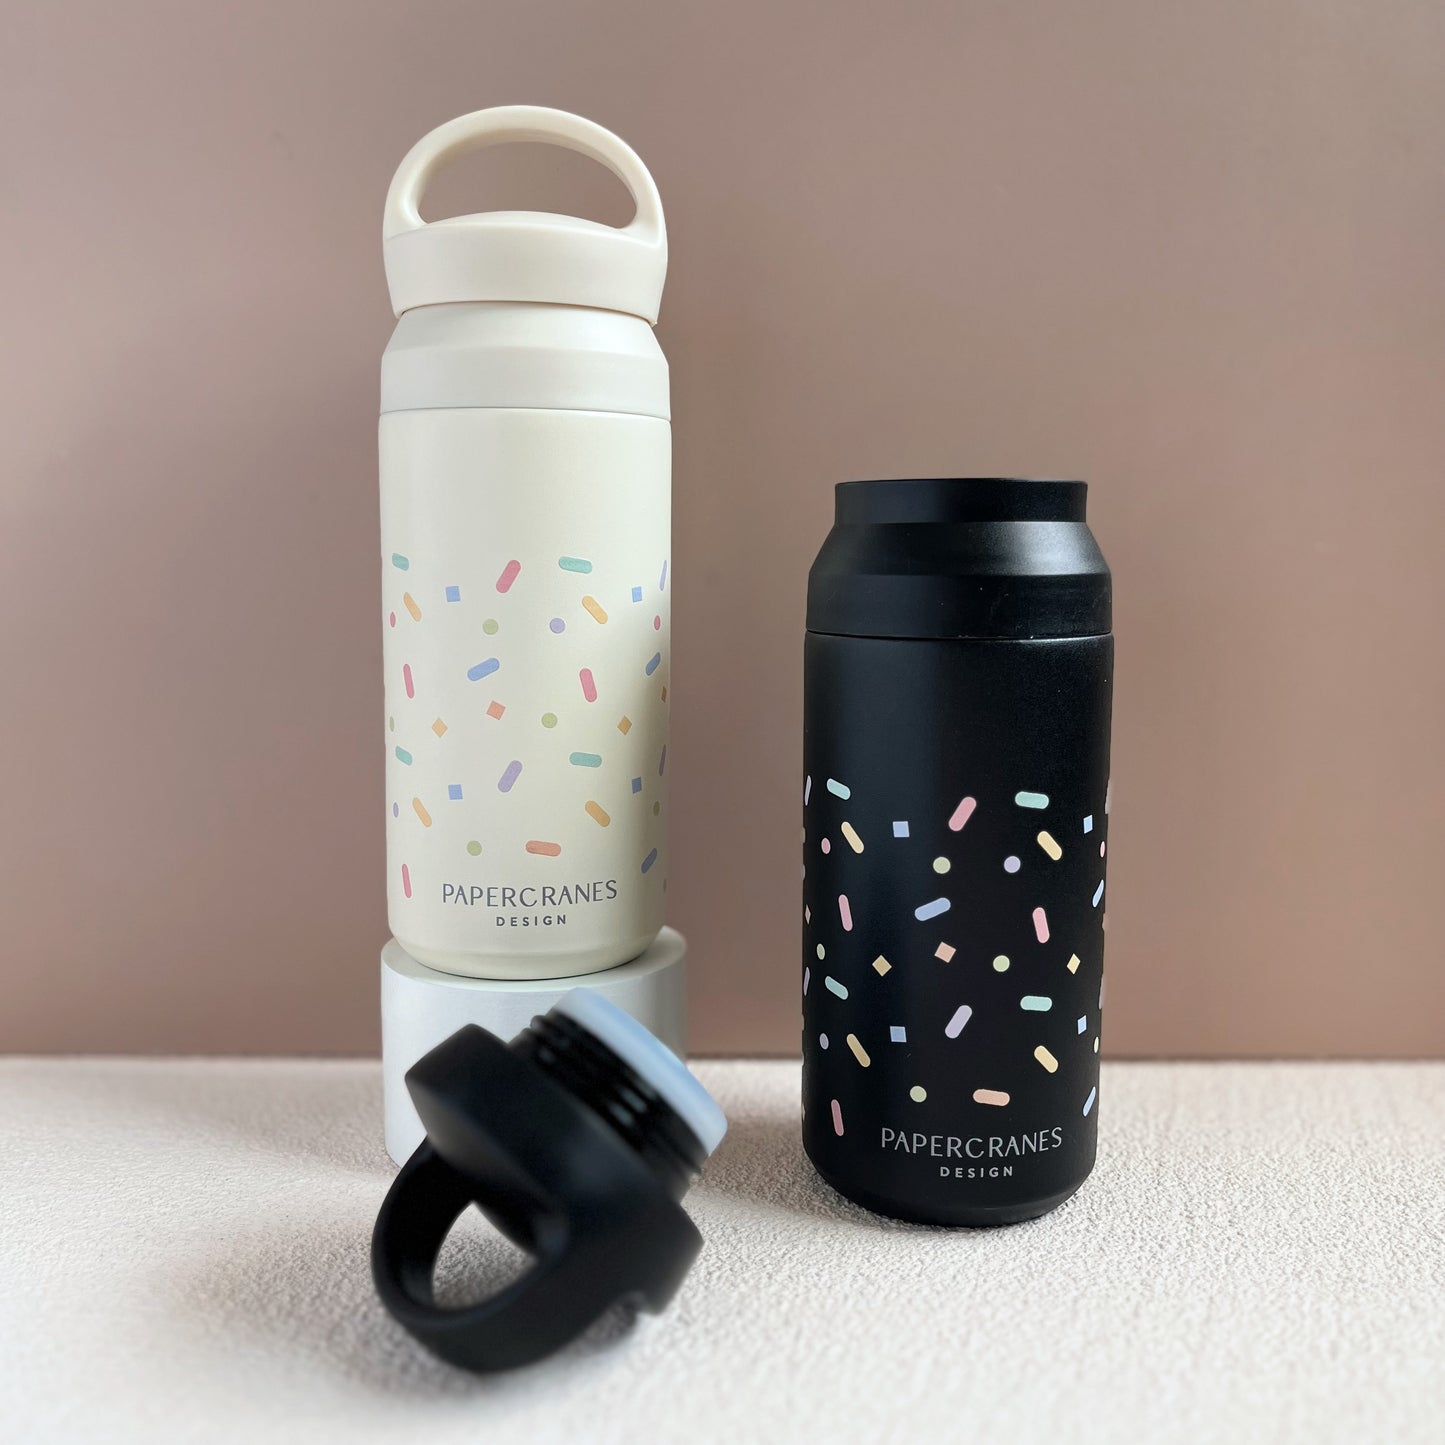 Confetti Party Collector's Set (UP. $61)